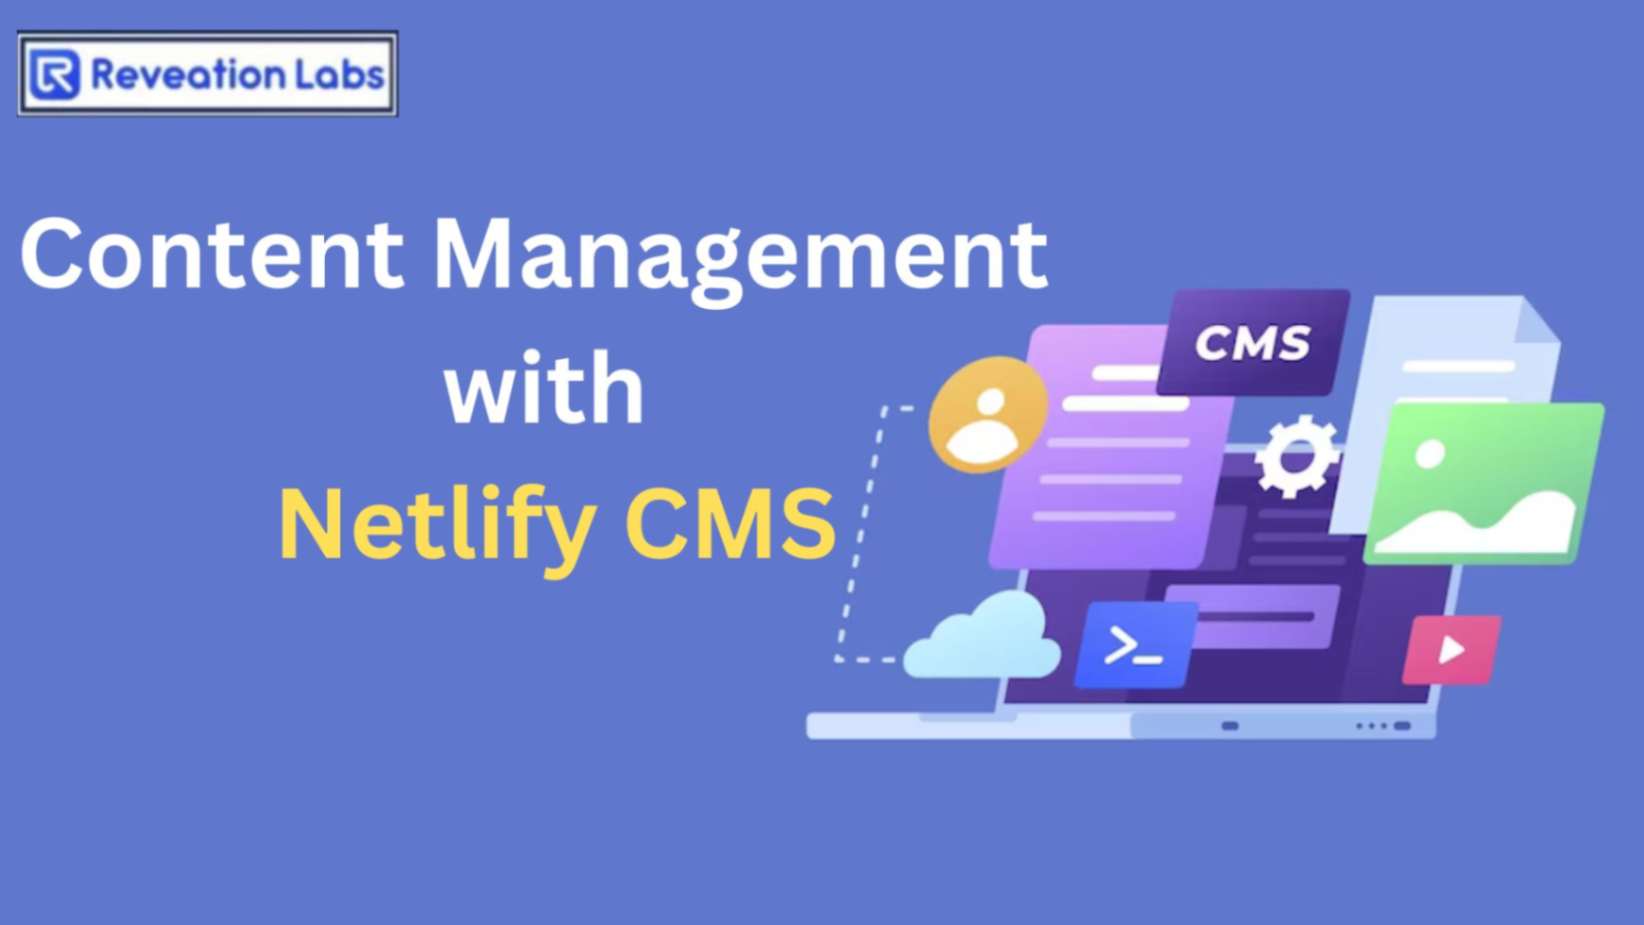 Content Management with Netlify CMS